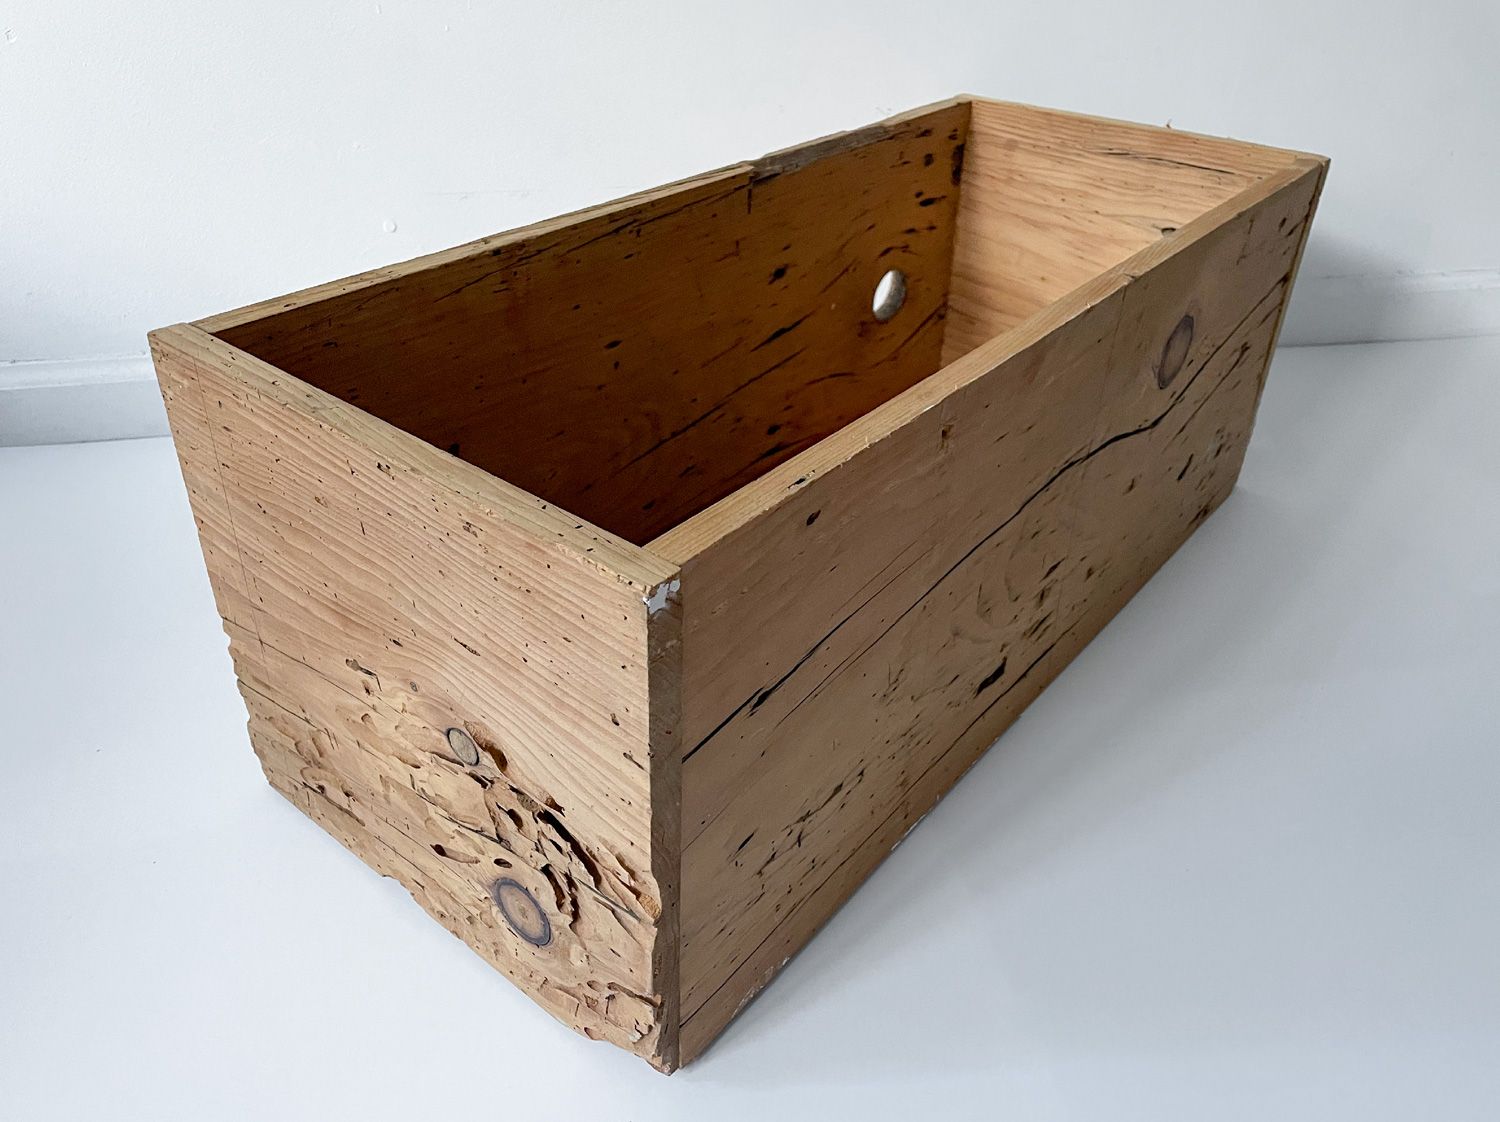 Rectangular wooden crate against a white background